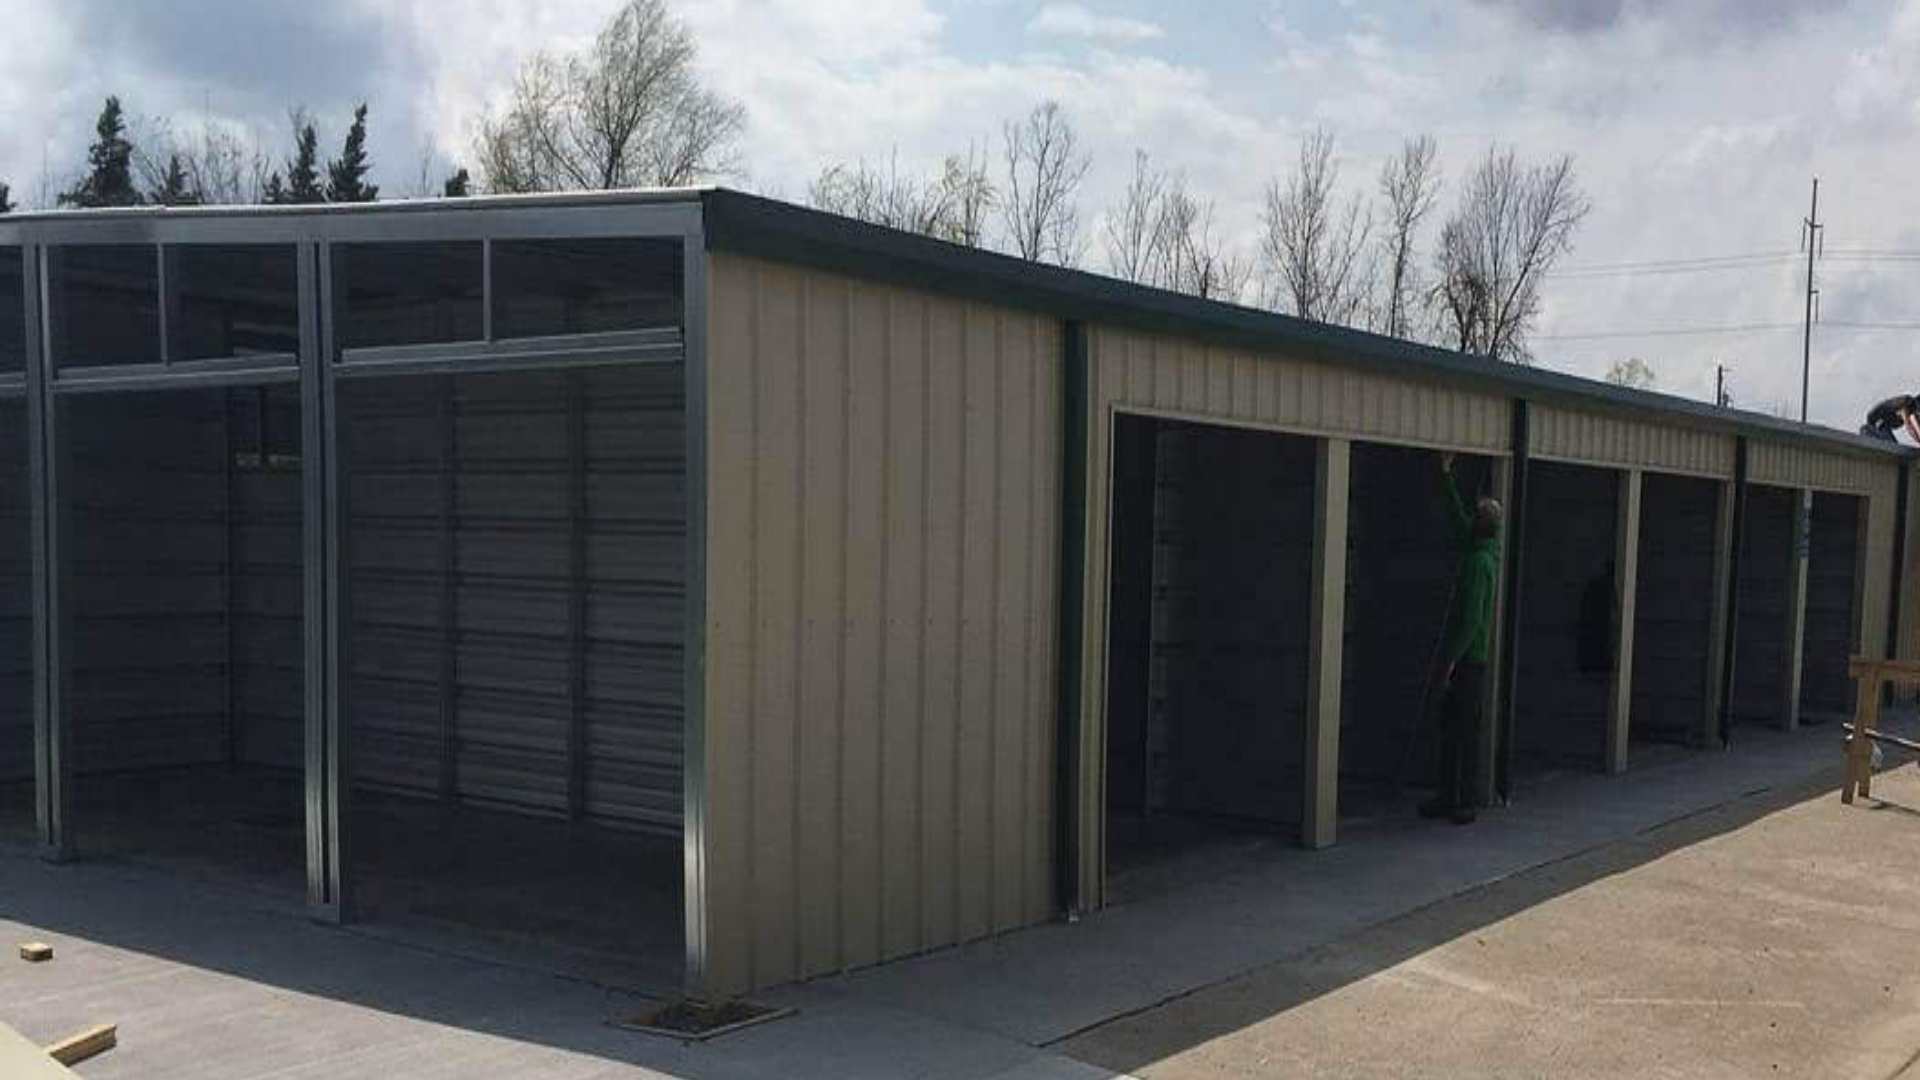 Busting 9 Common Myths About Self-Storage Buildings